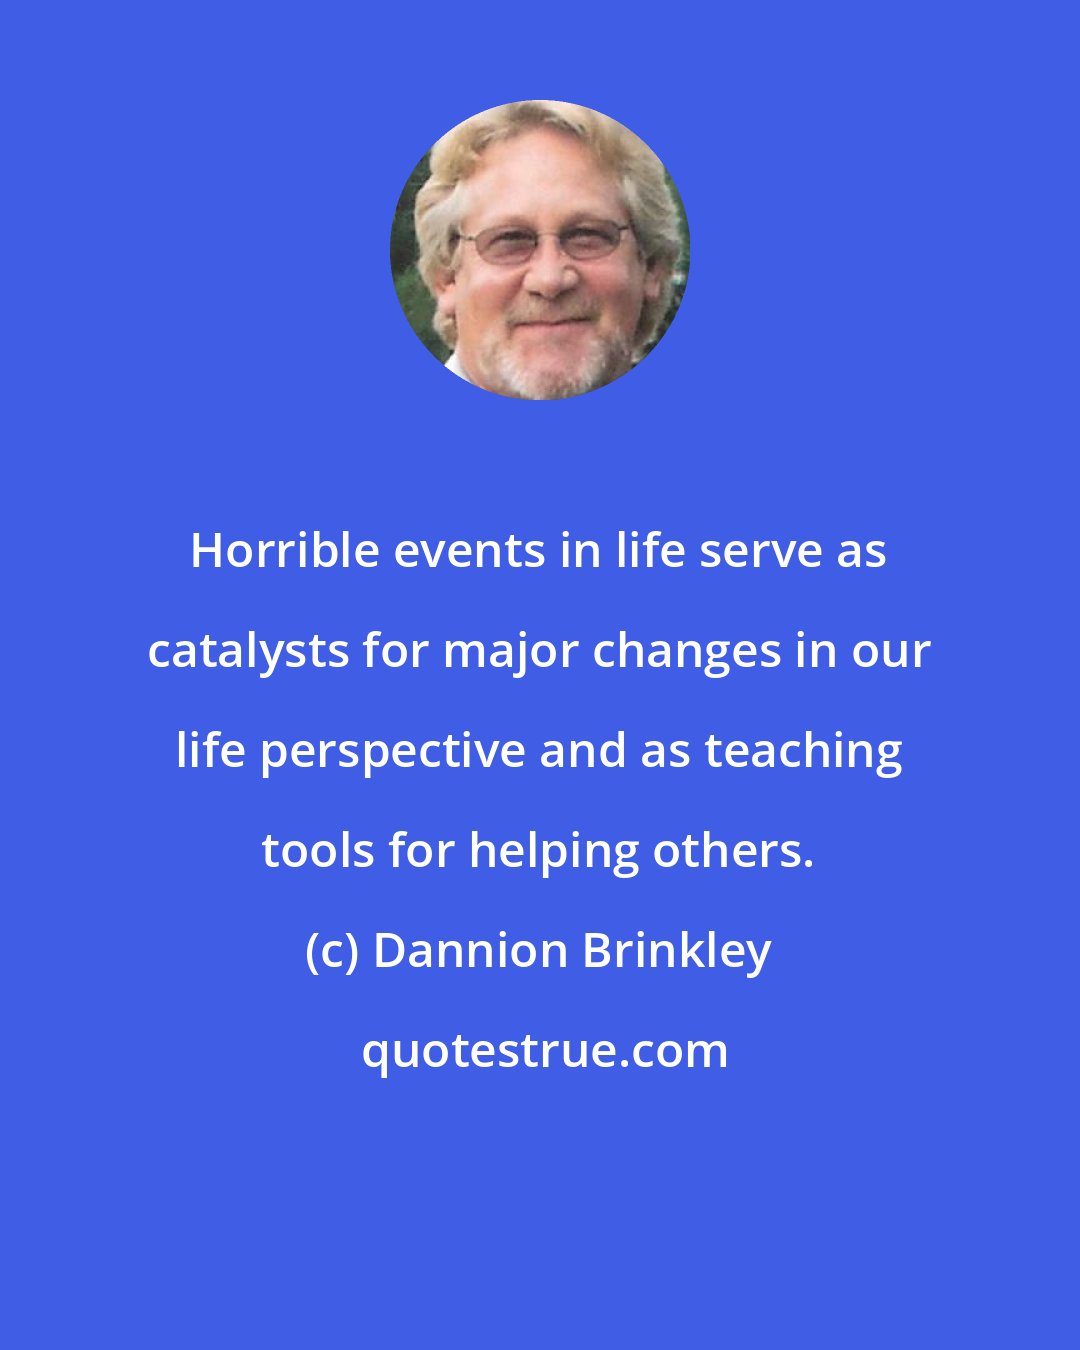 Dannion Brinkley: Horrible events in life serve as catalysts for major changes in our life perspective and as teaching tools for helping others.